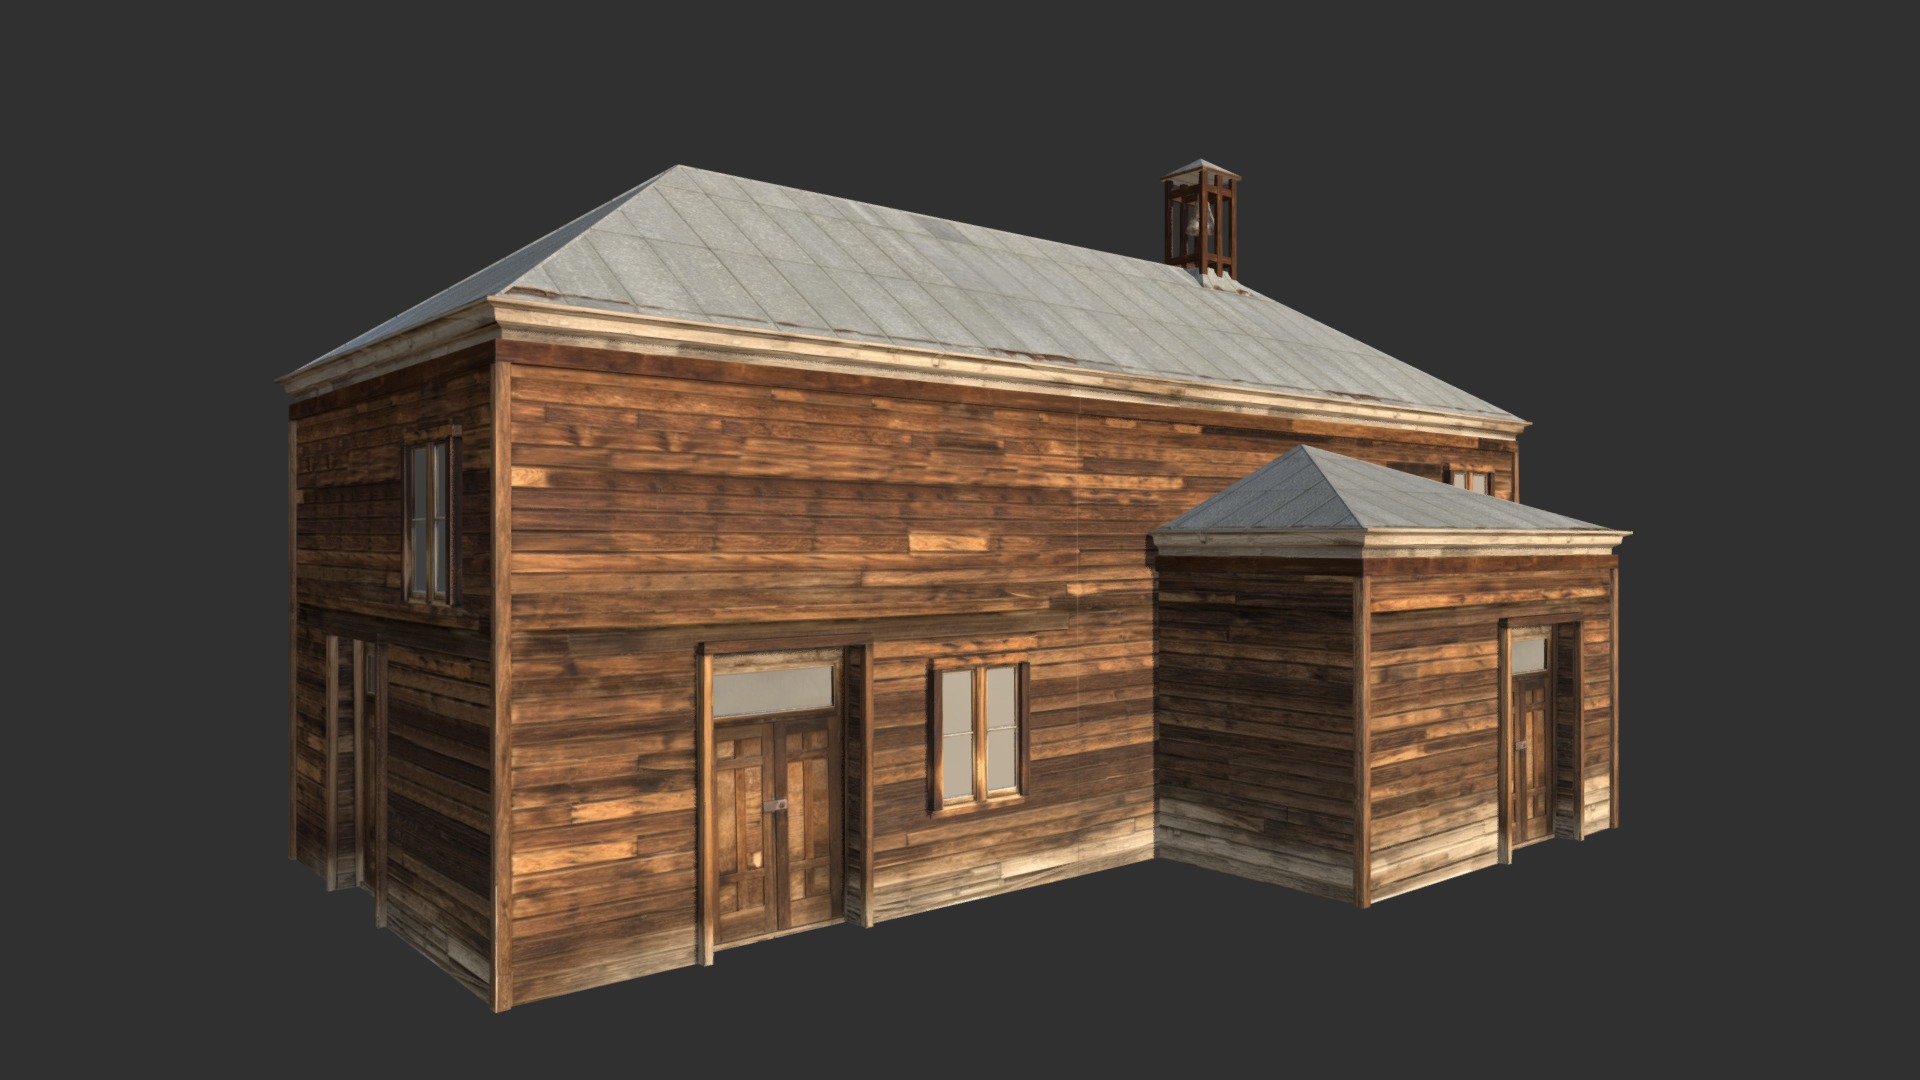 3D model Wild West School - This is a 3D model of the Wild West School. The 3D model is about a wooden house with a chimney.